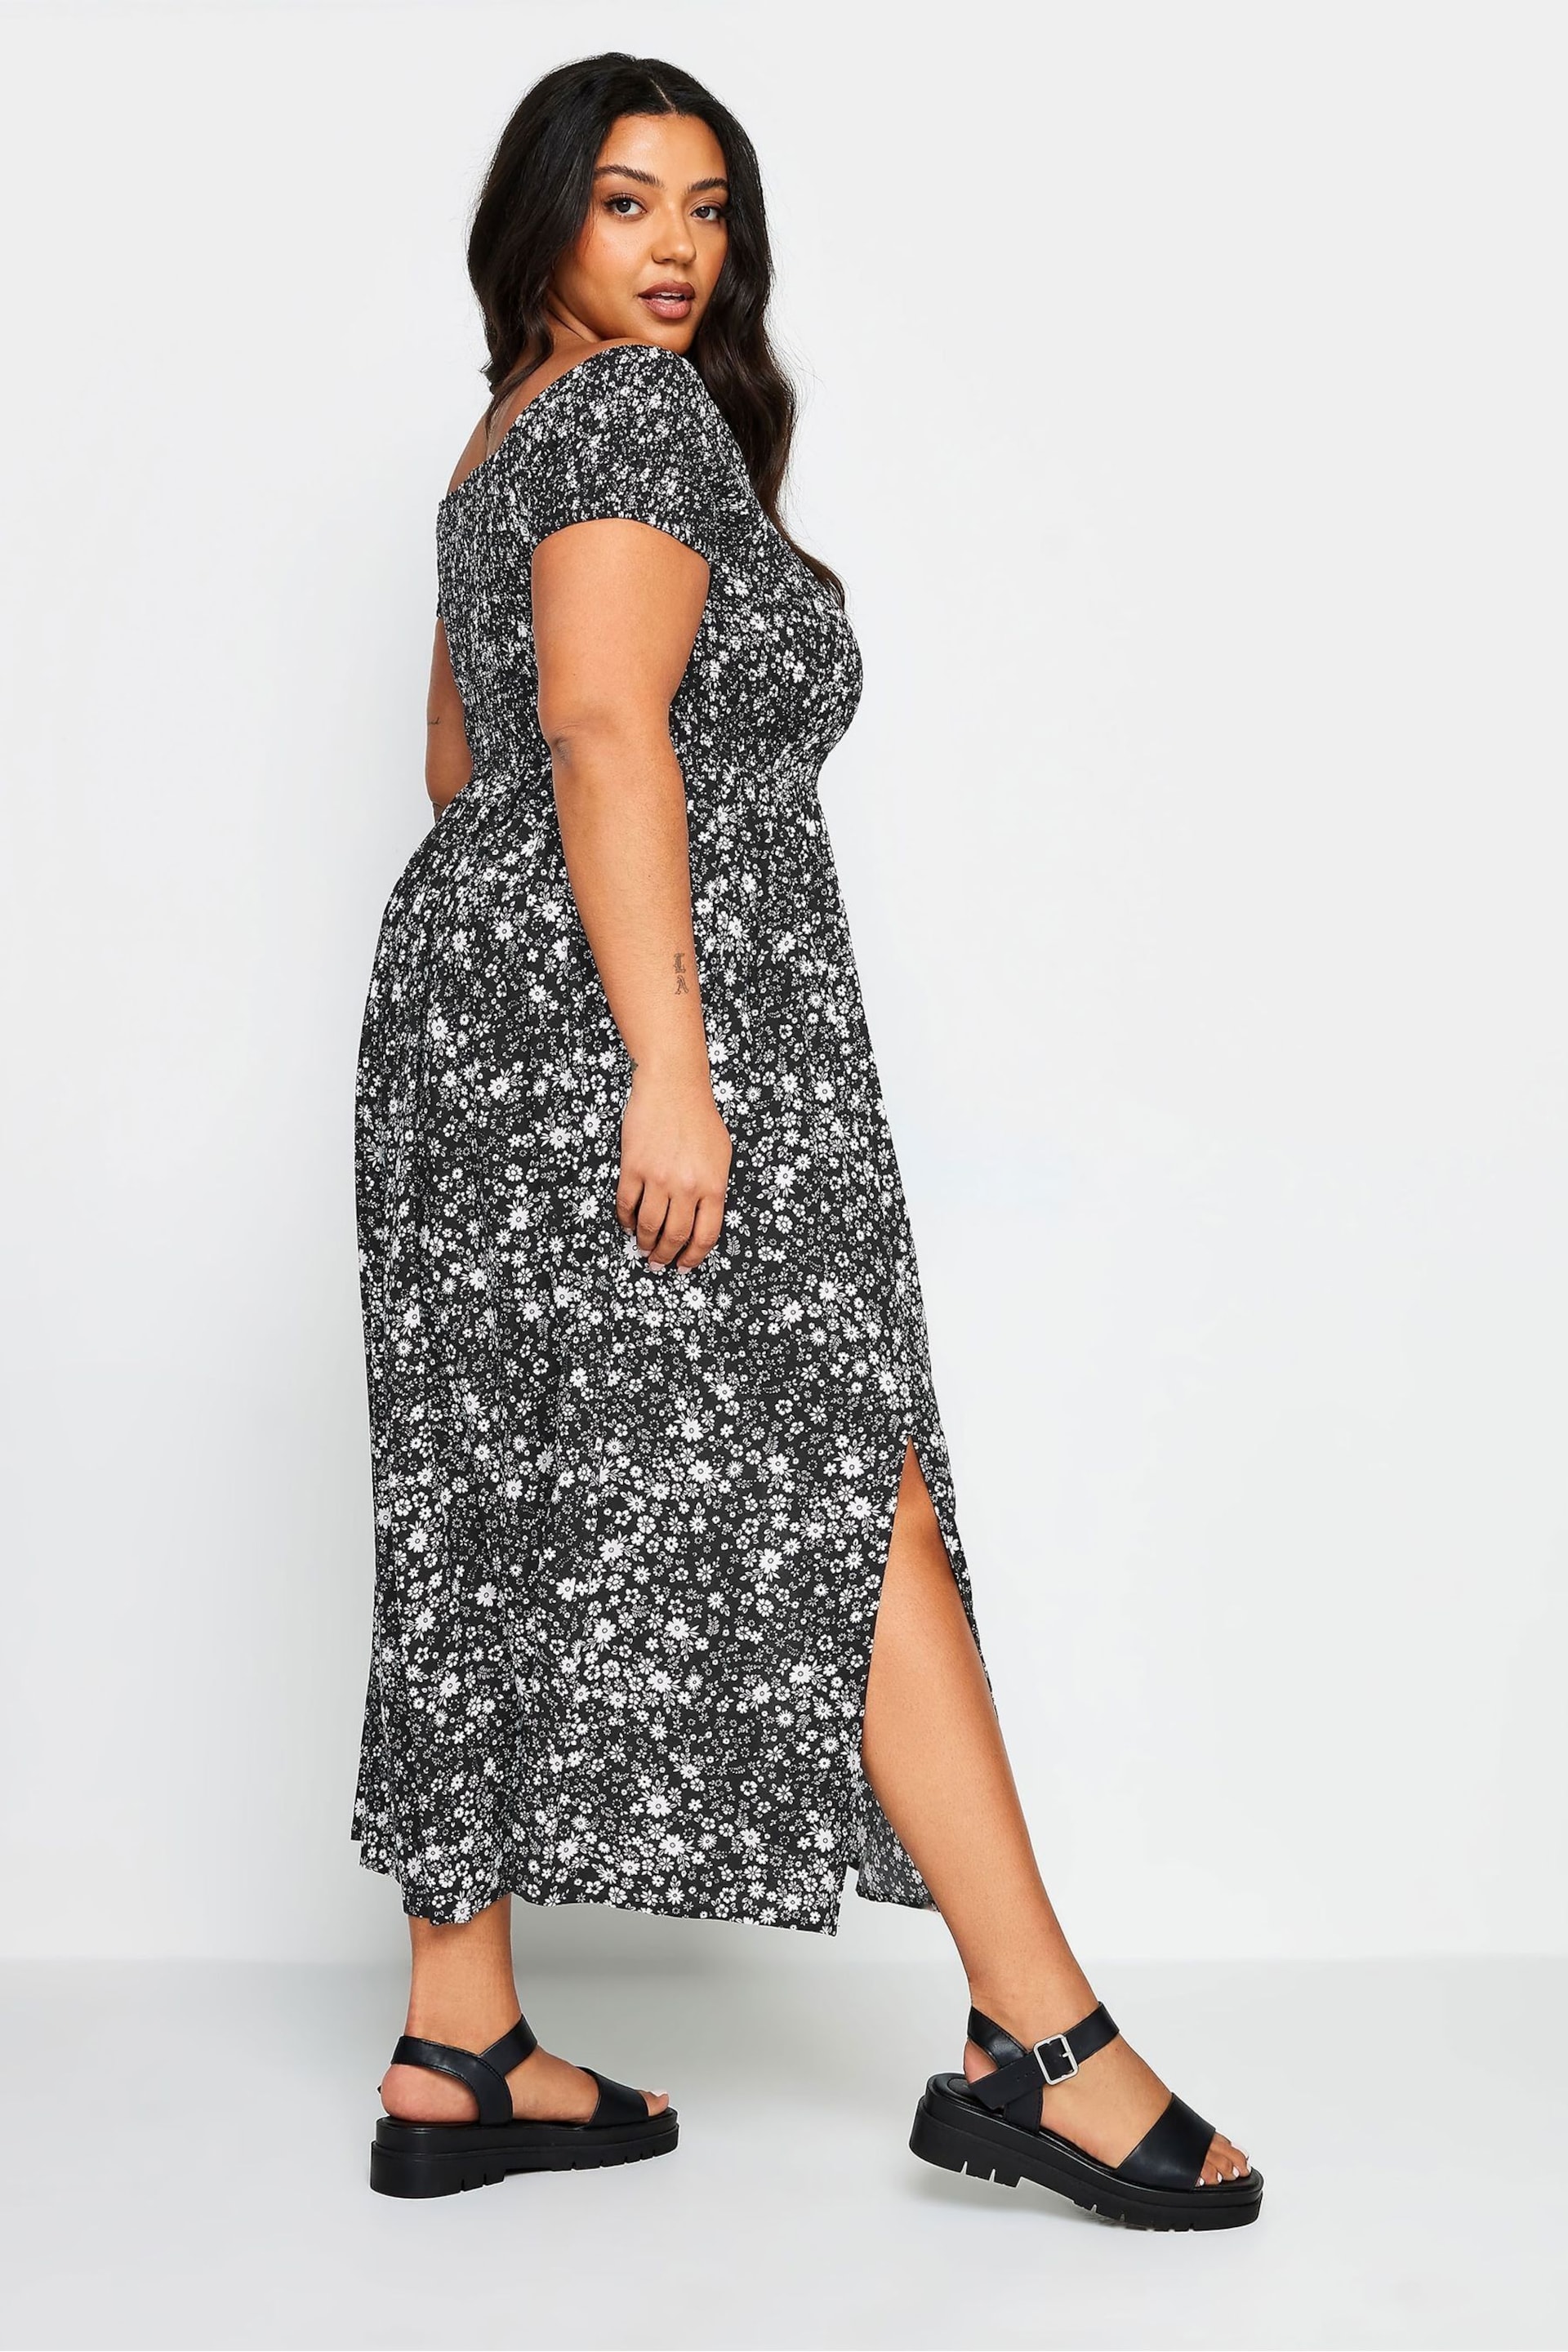 Yours Curve Black Ditsy Floral Print Shirred Bardot Maxi Dress - Image 4 of 5